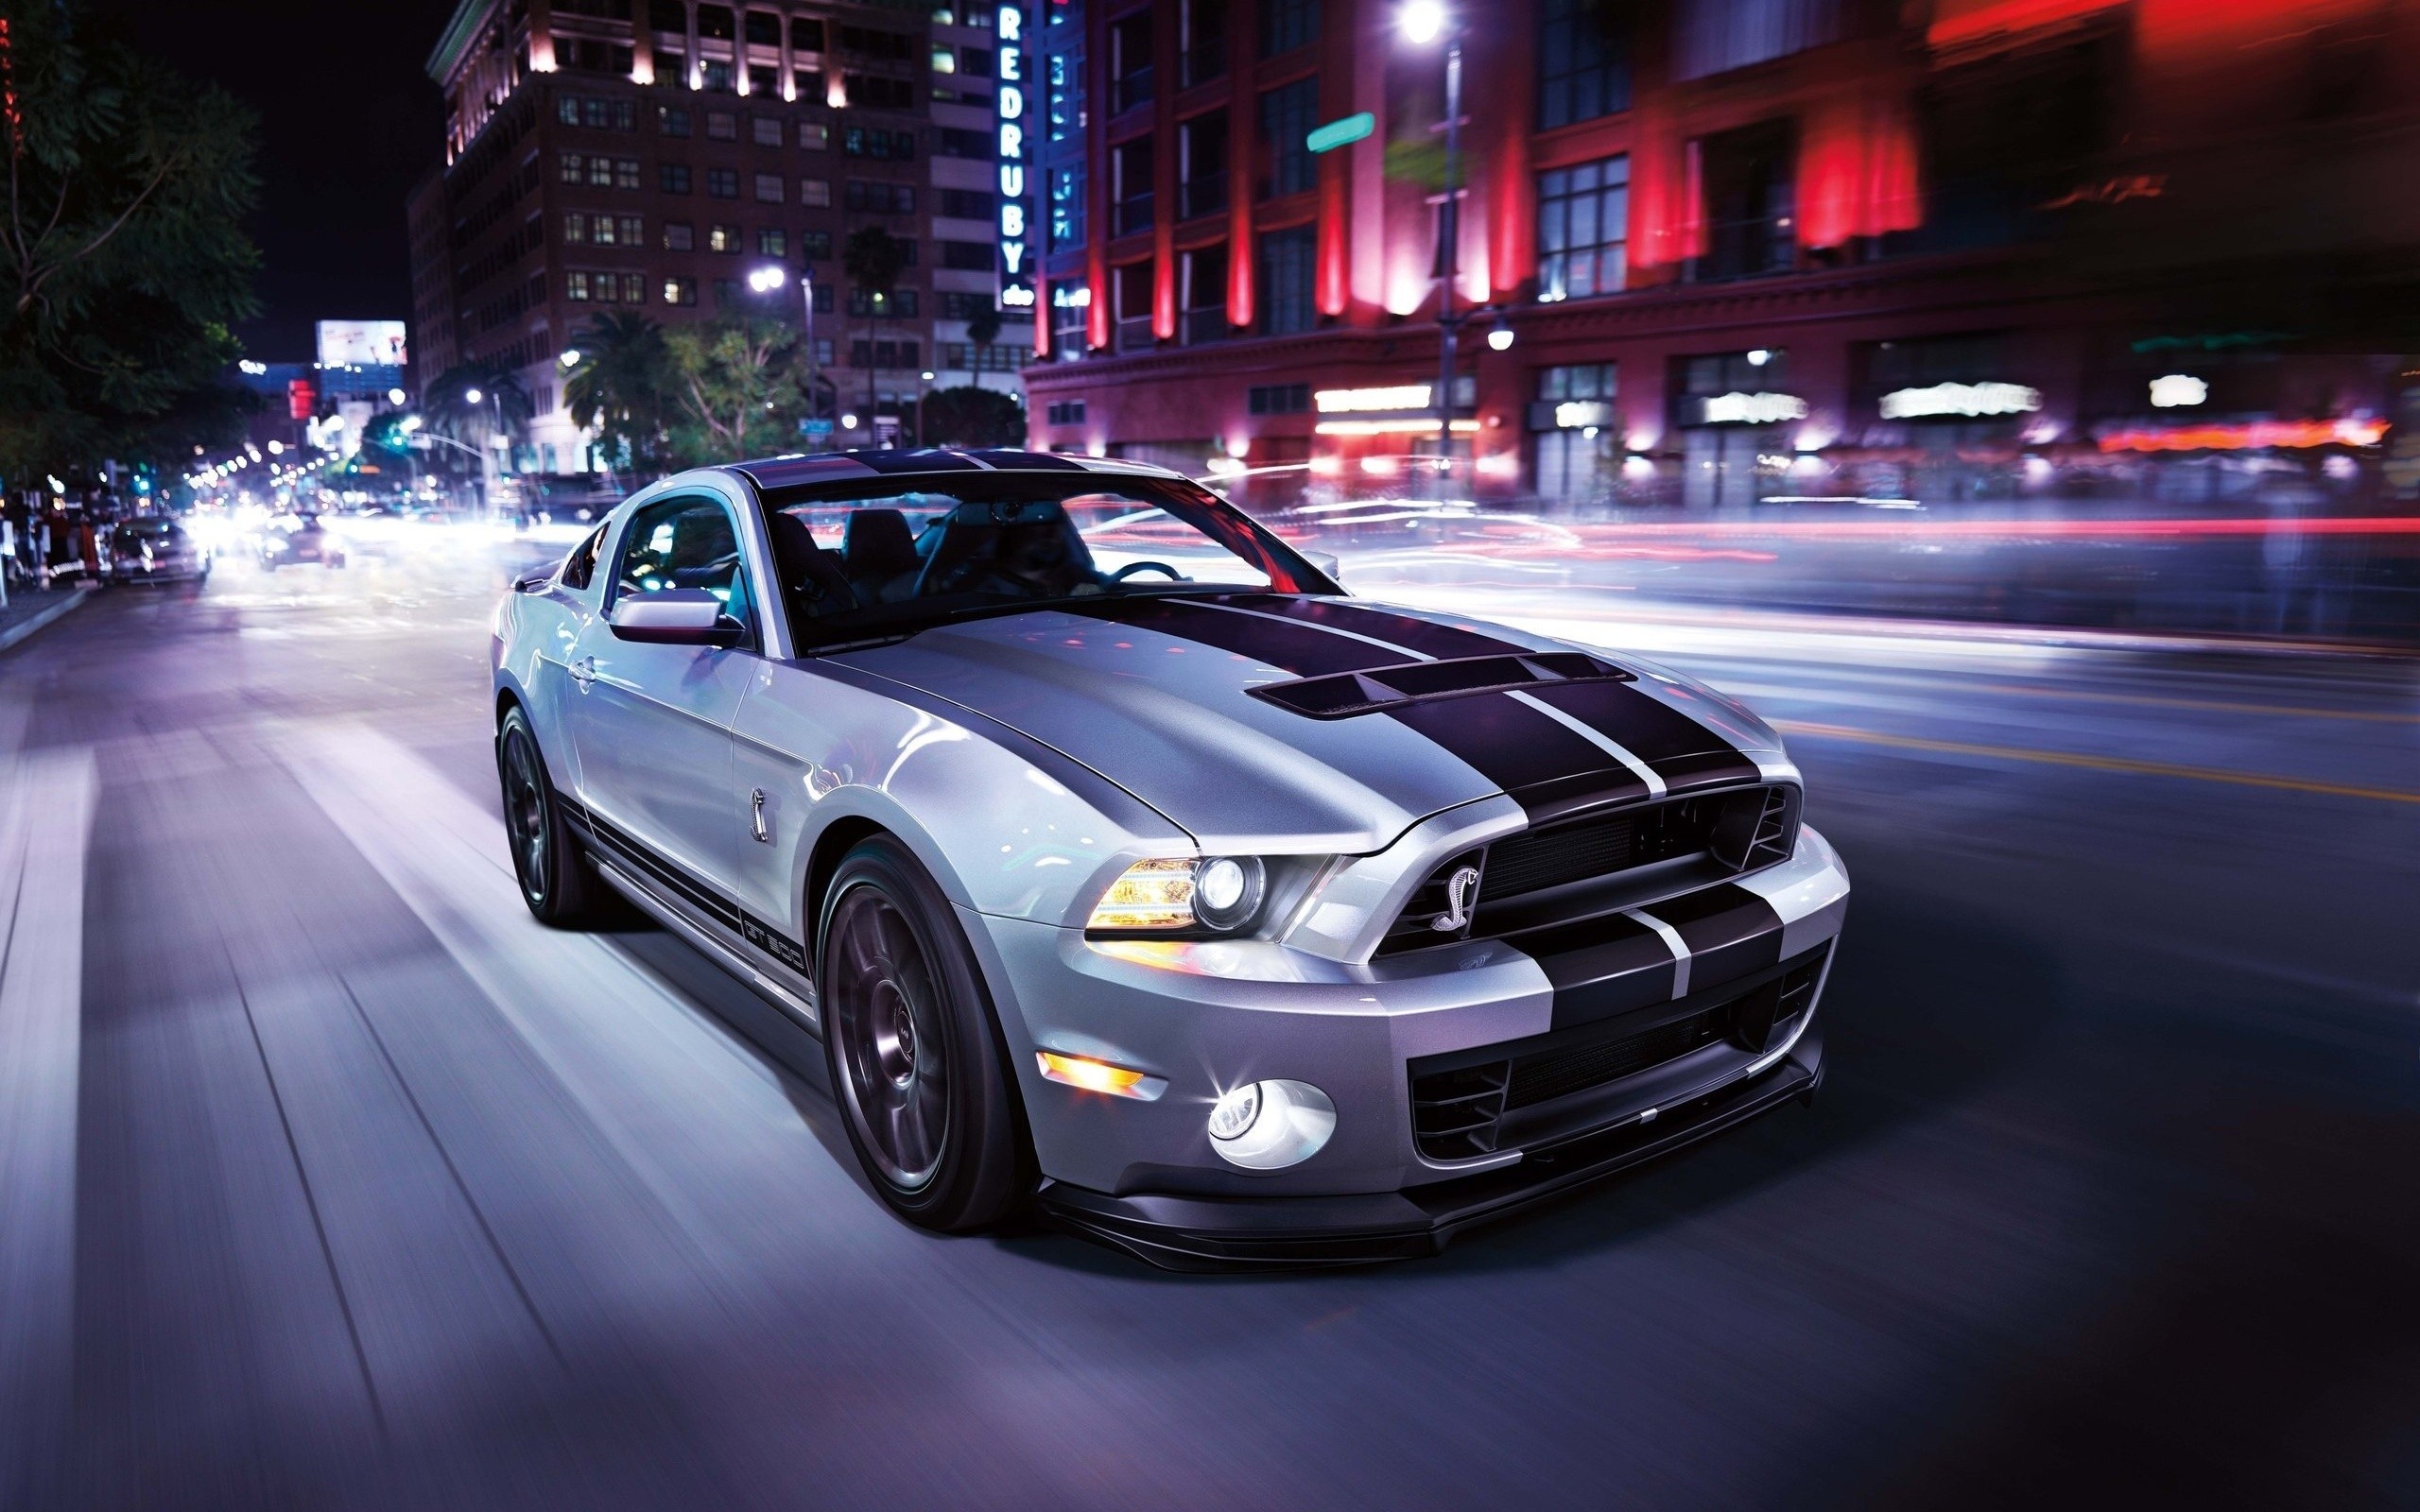 General 2560x1600 muscle cars Ford Mustang Shelby car Shelby city vehicle Ford Ford Mustang racing stripes Ford Mustang S-197 II American cars